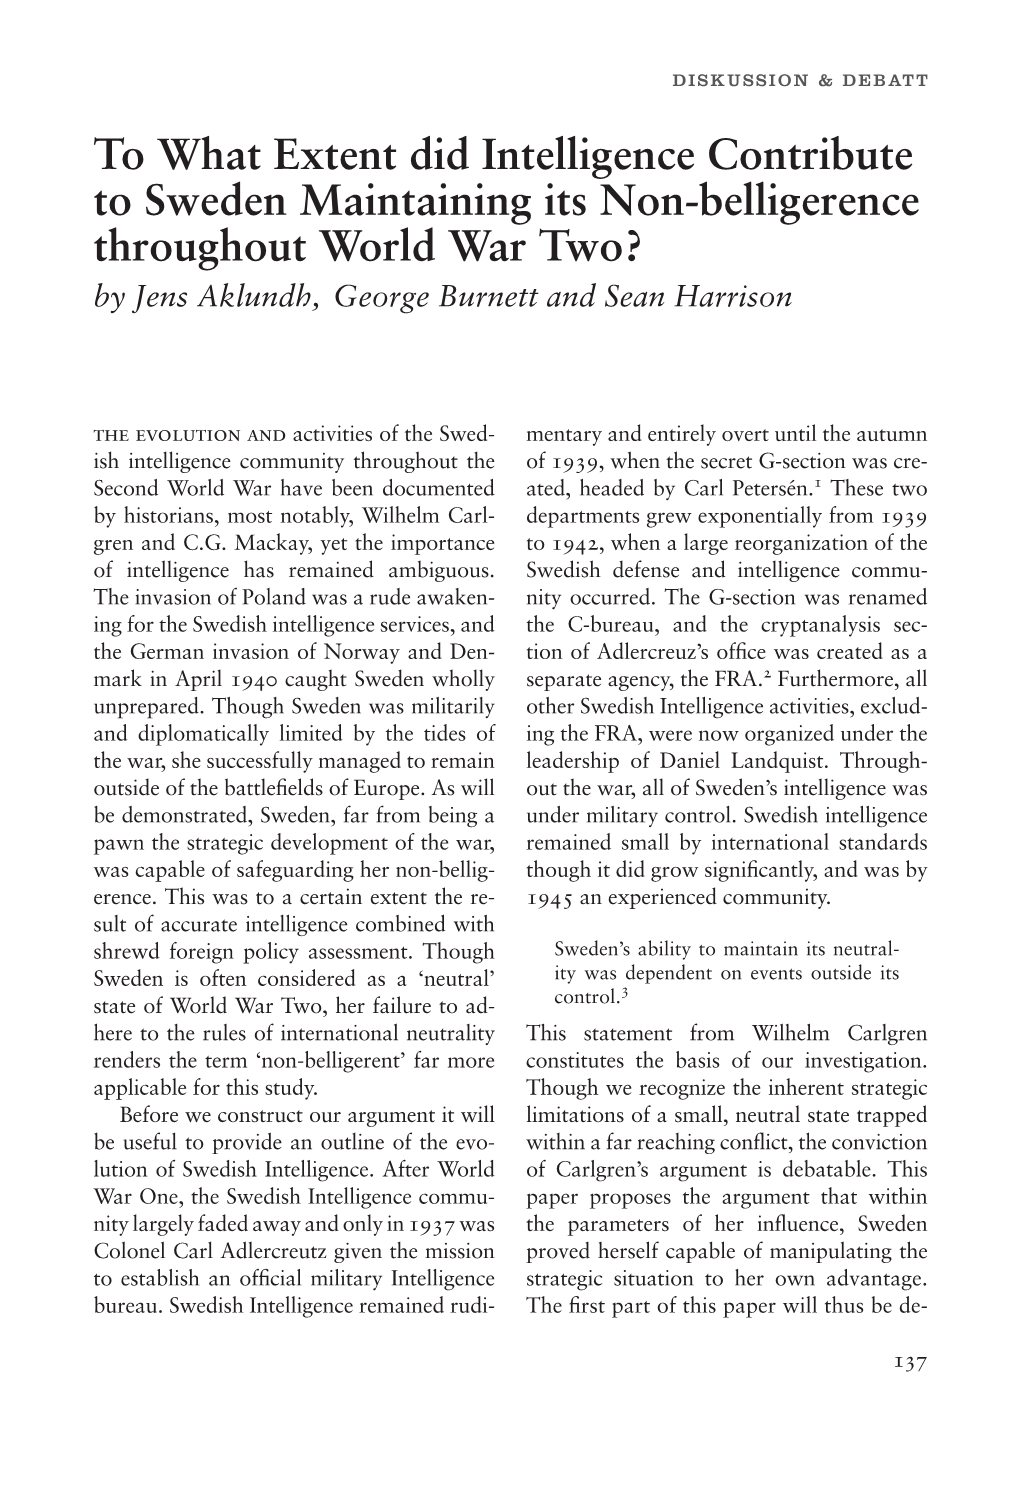 To What Extent Did Intelligence Contribute to Sweden Maintaining Its Non-Belligerence Throughout World War Two? by Jens Aklundh, George Burnett and Sean Harrison